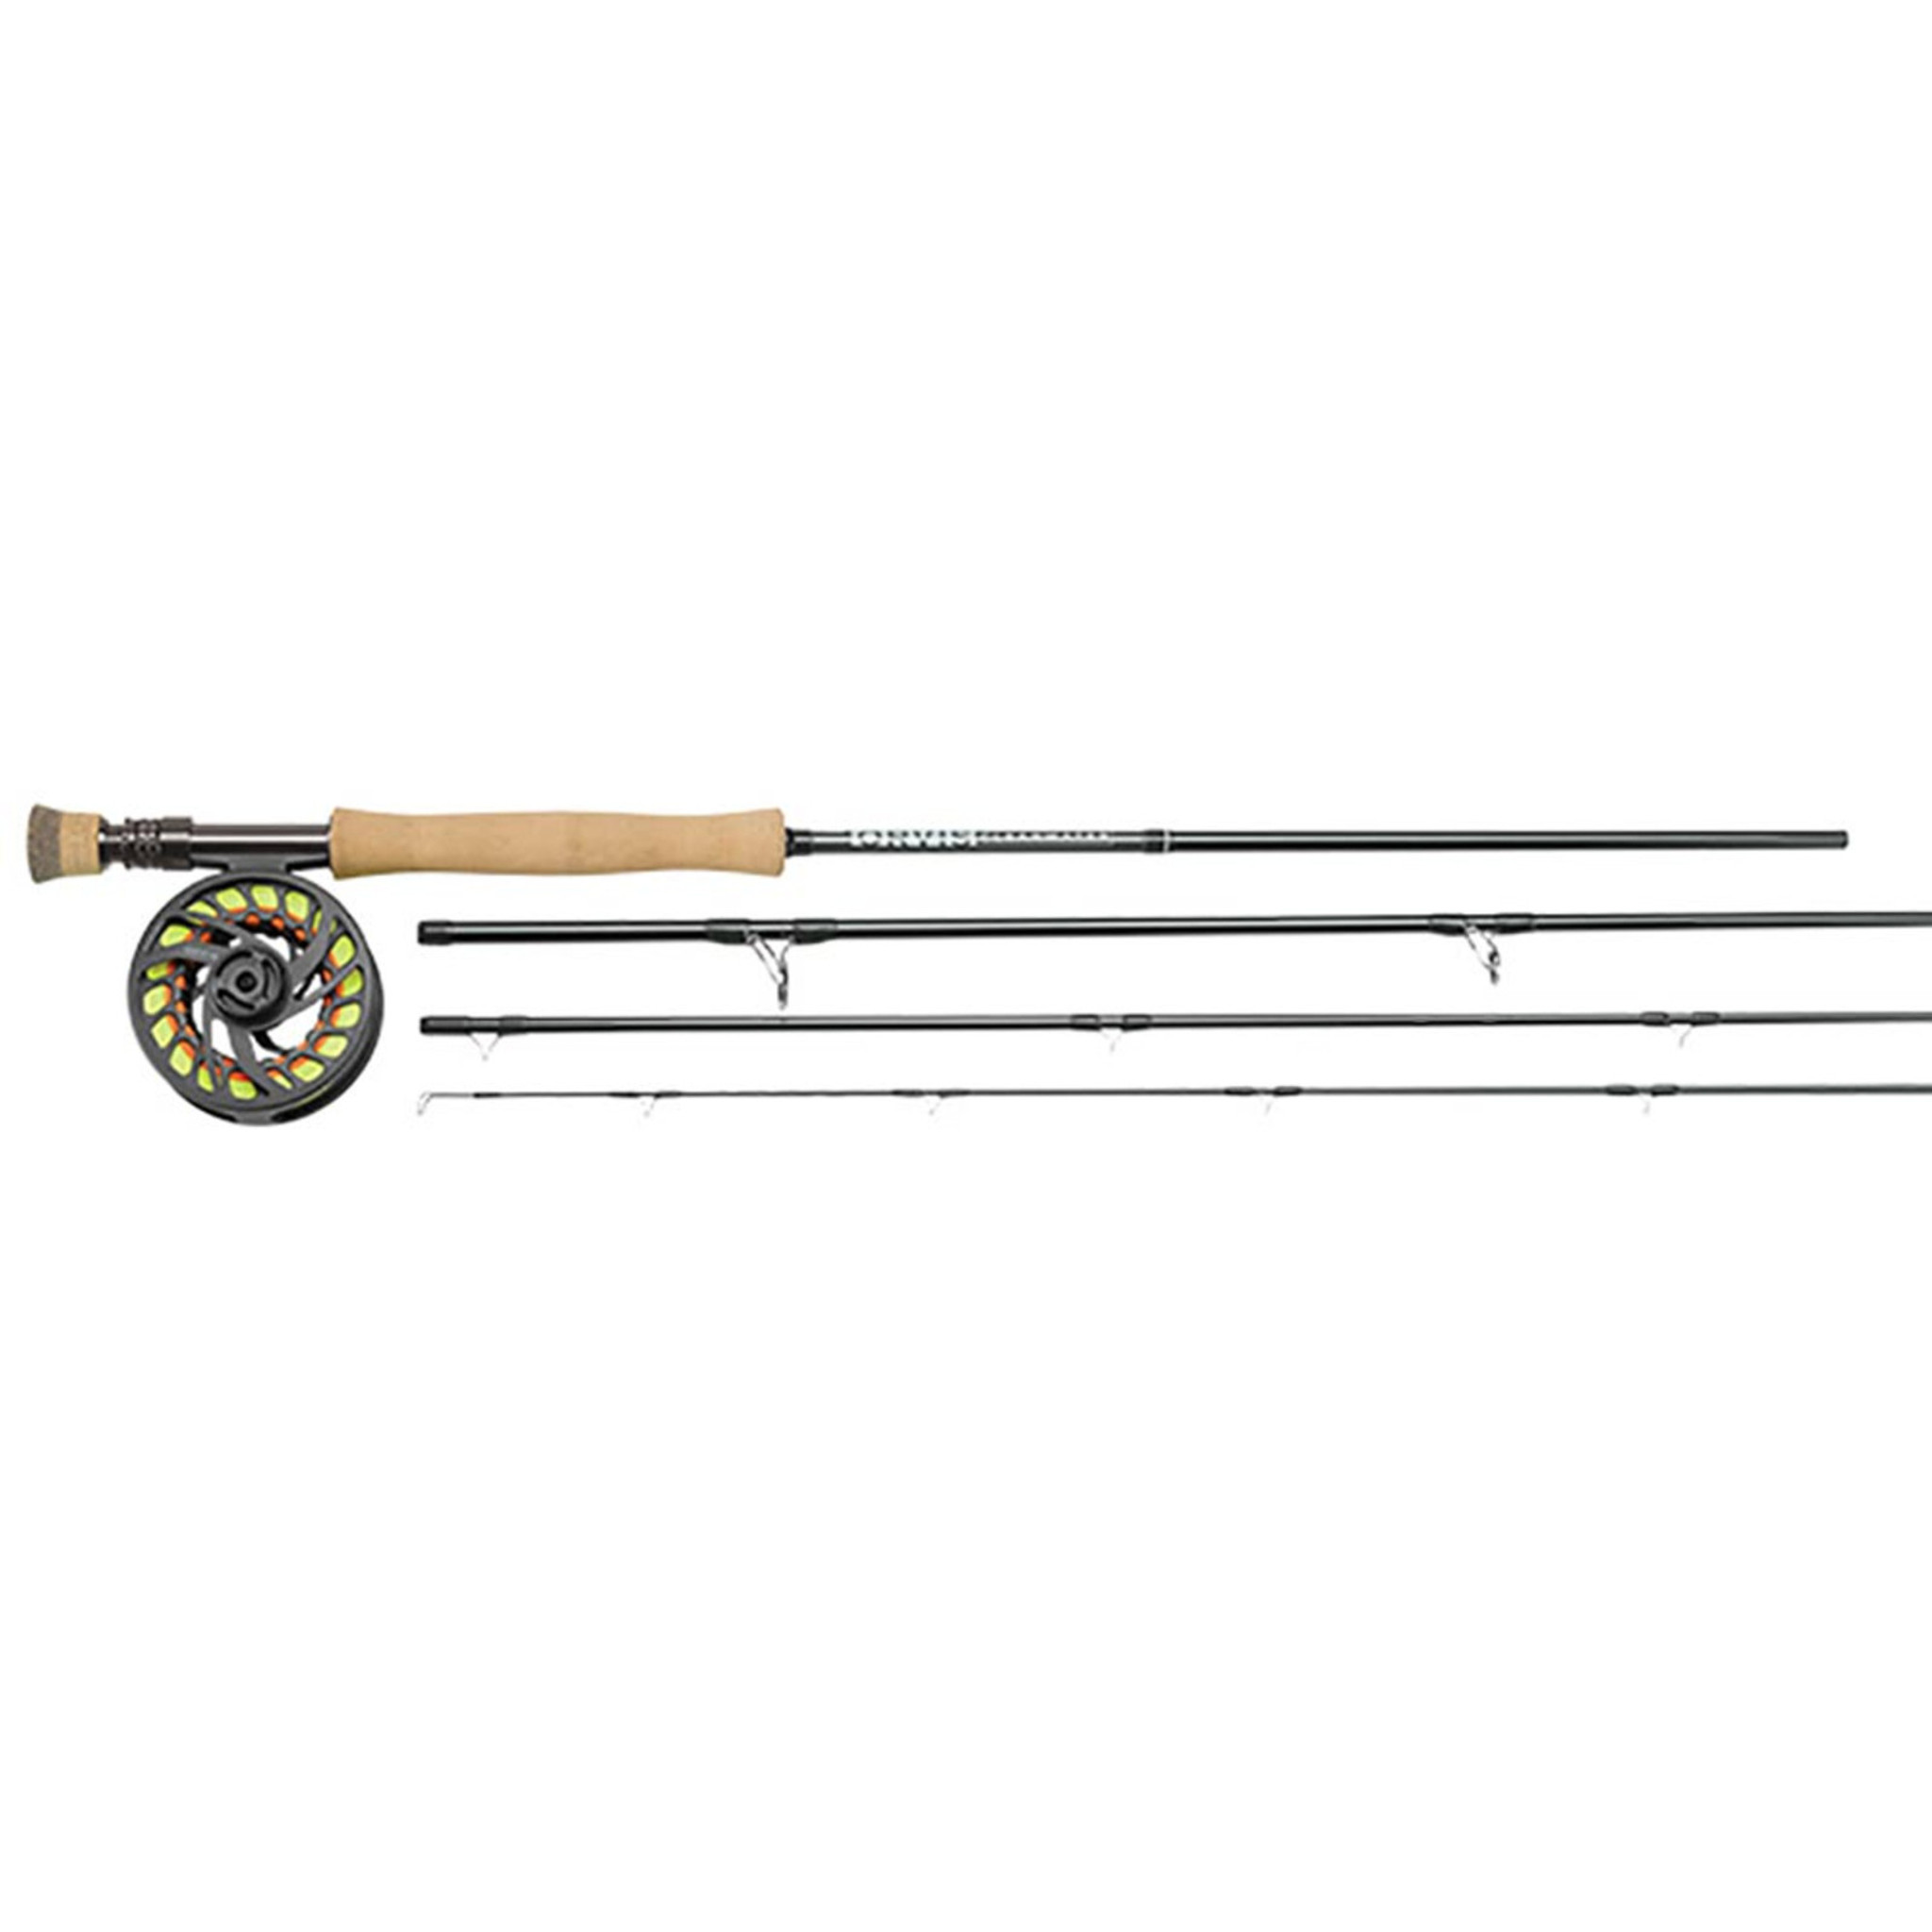 Orvis Clearwater Fly Rod - 9'0